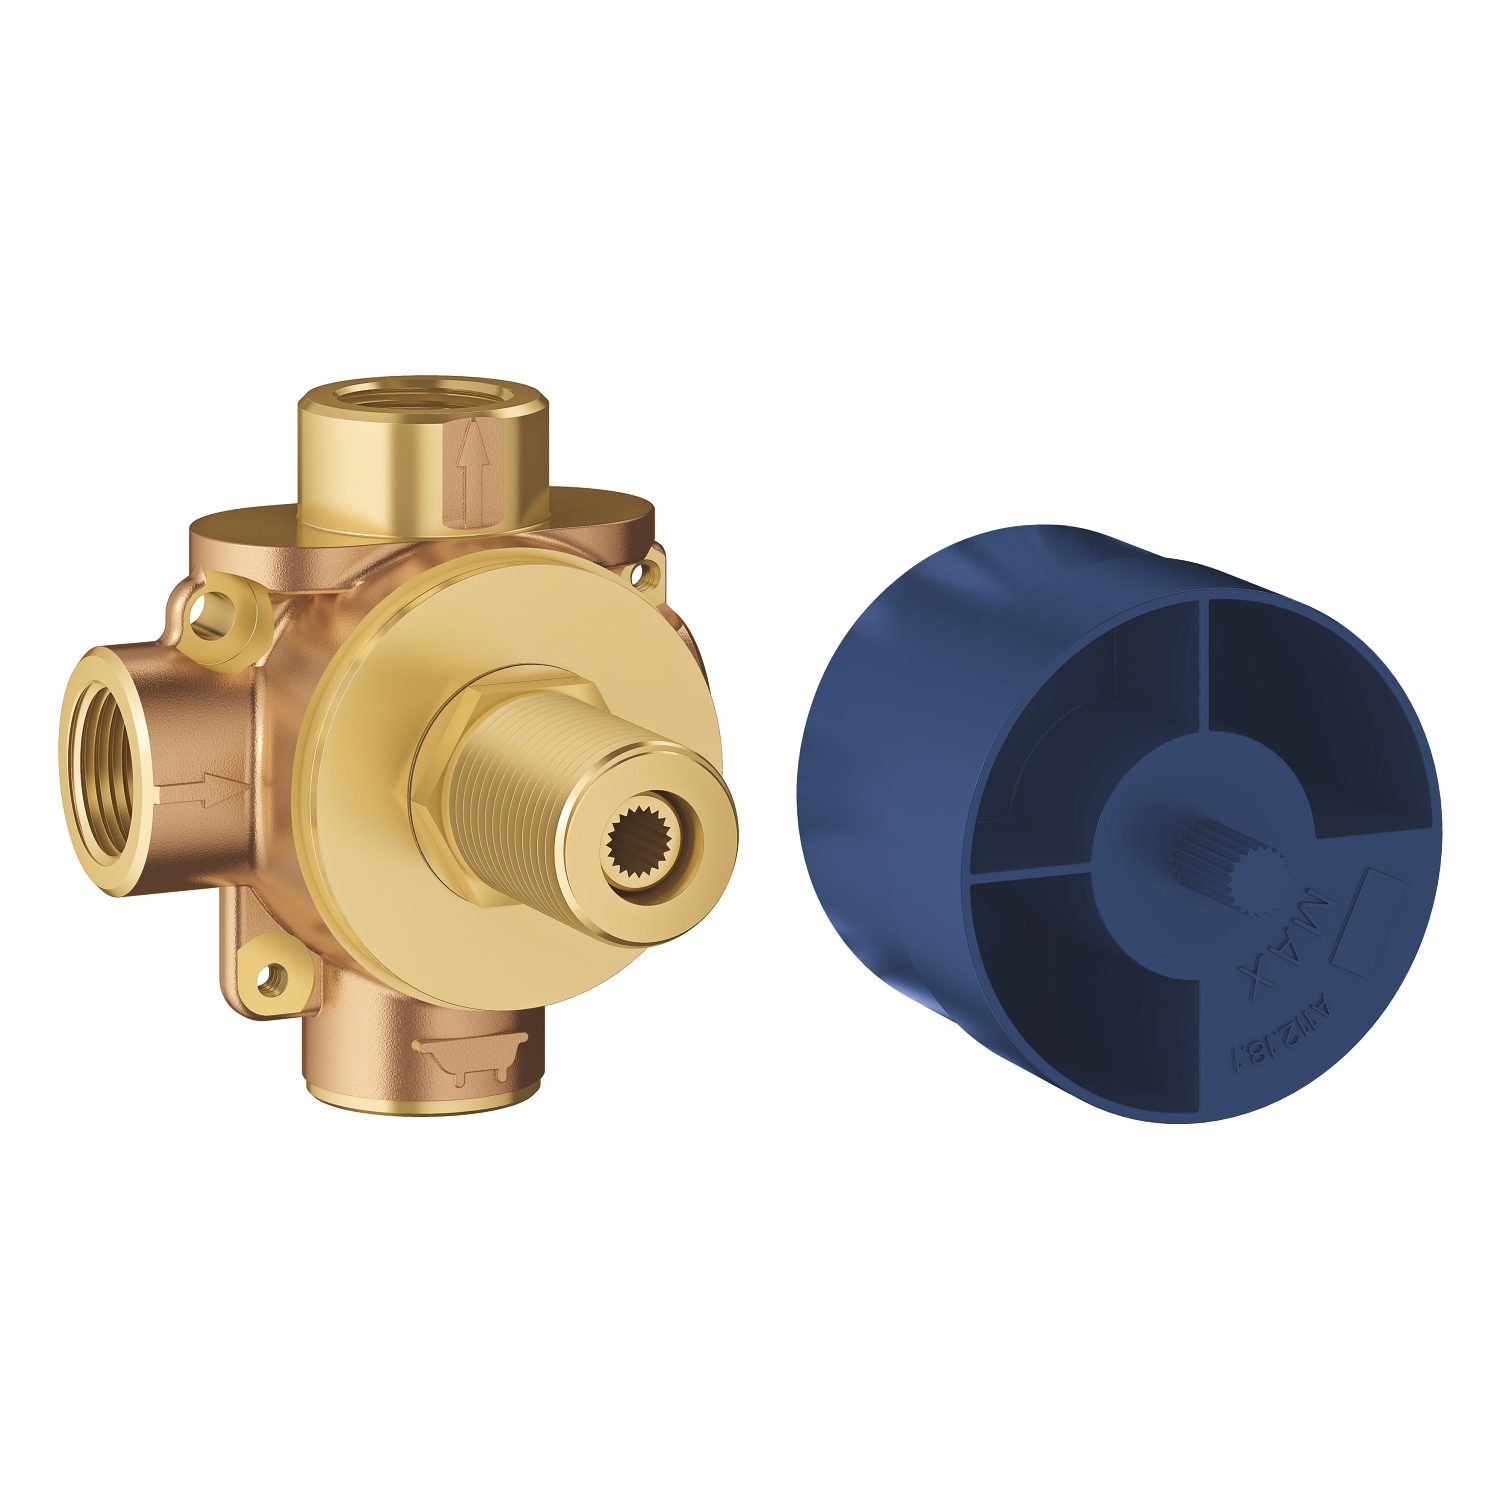 2-Way Diverter Rough-In Valve Discrete Functions 1/2" NPT 1 Inlet/2 Outlets